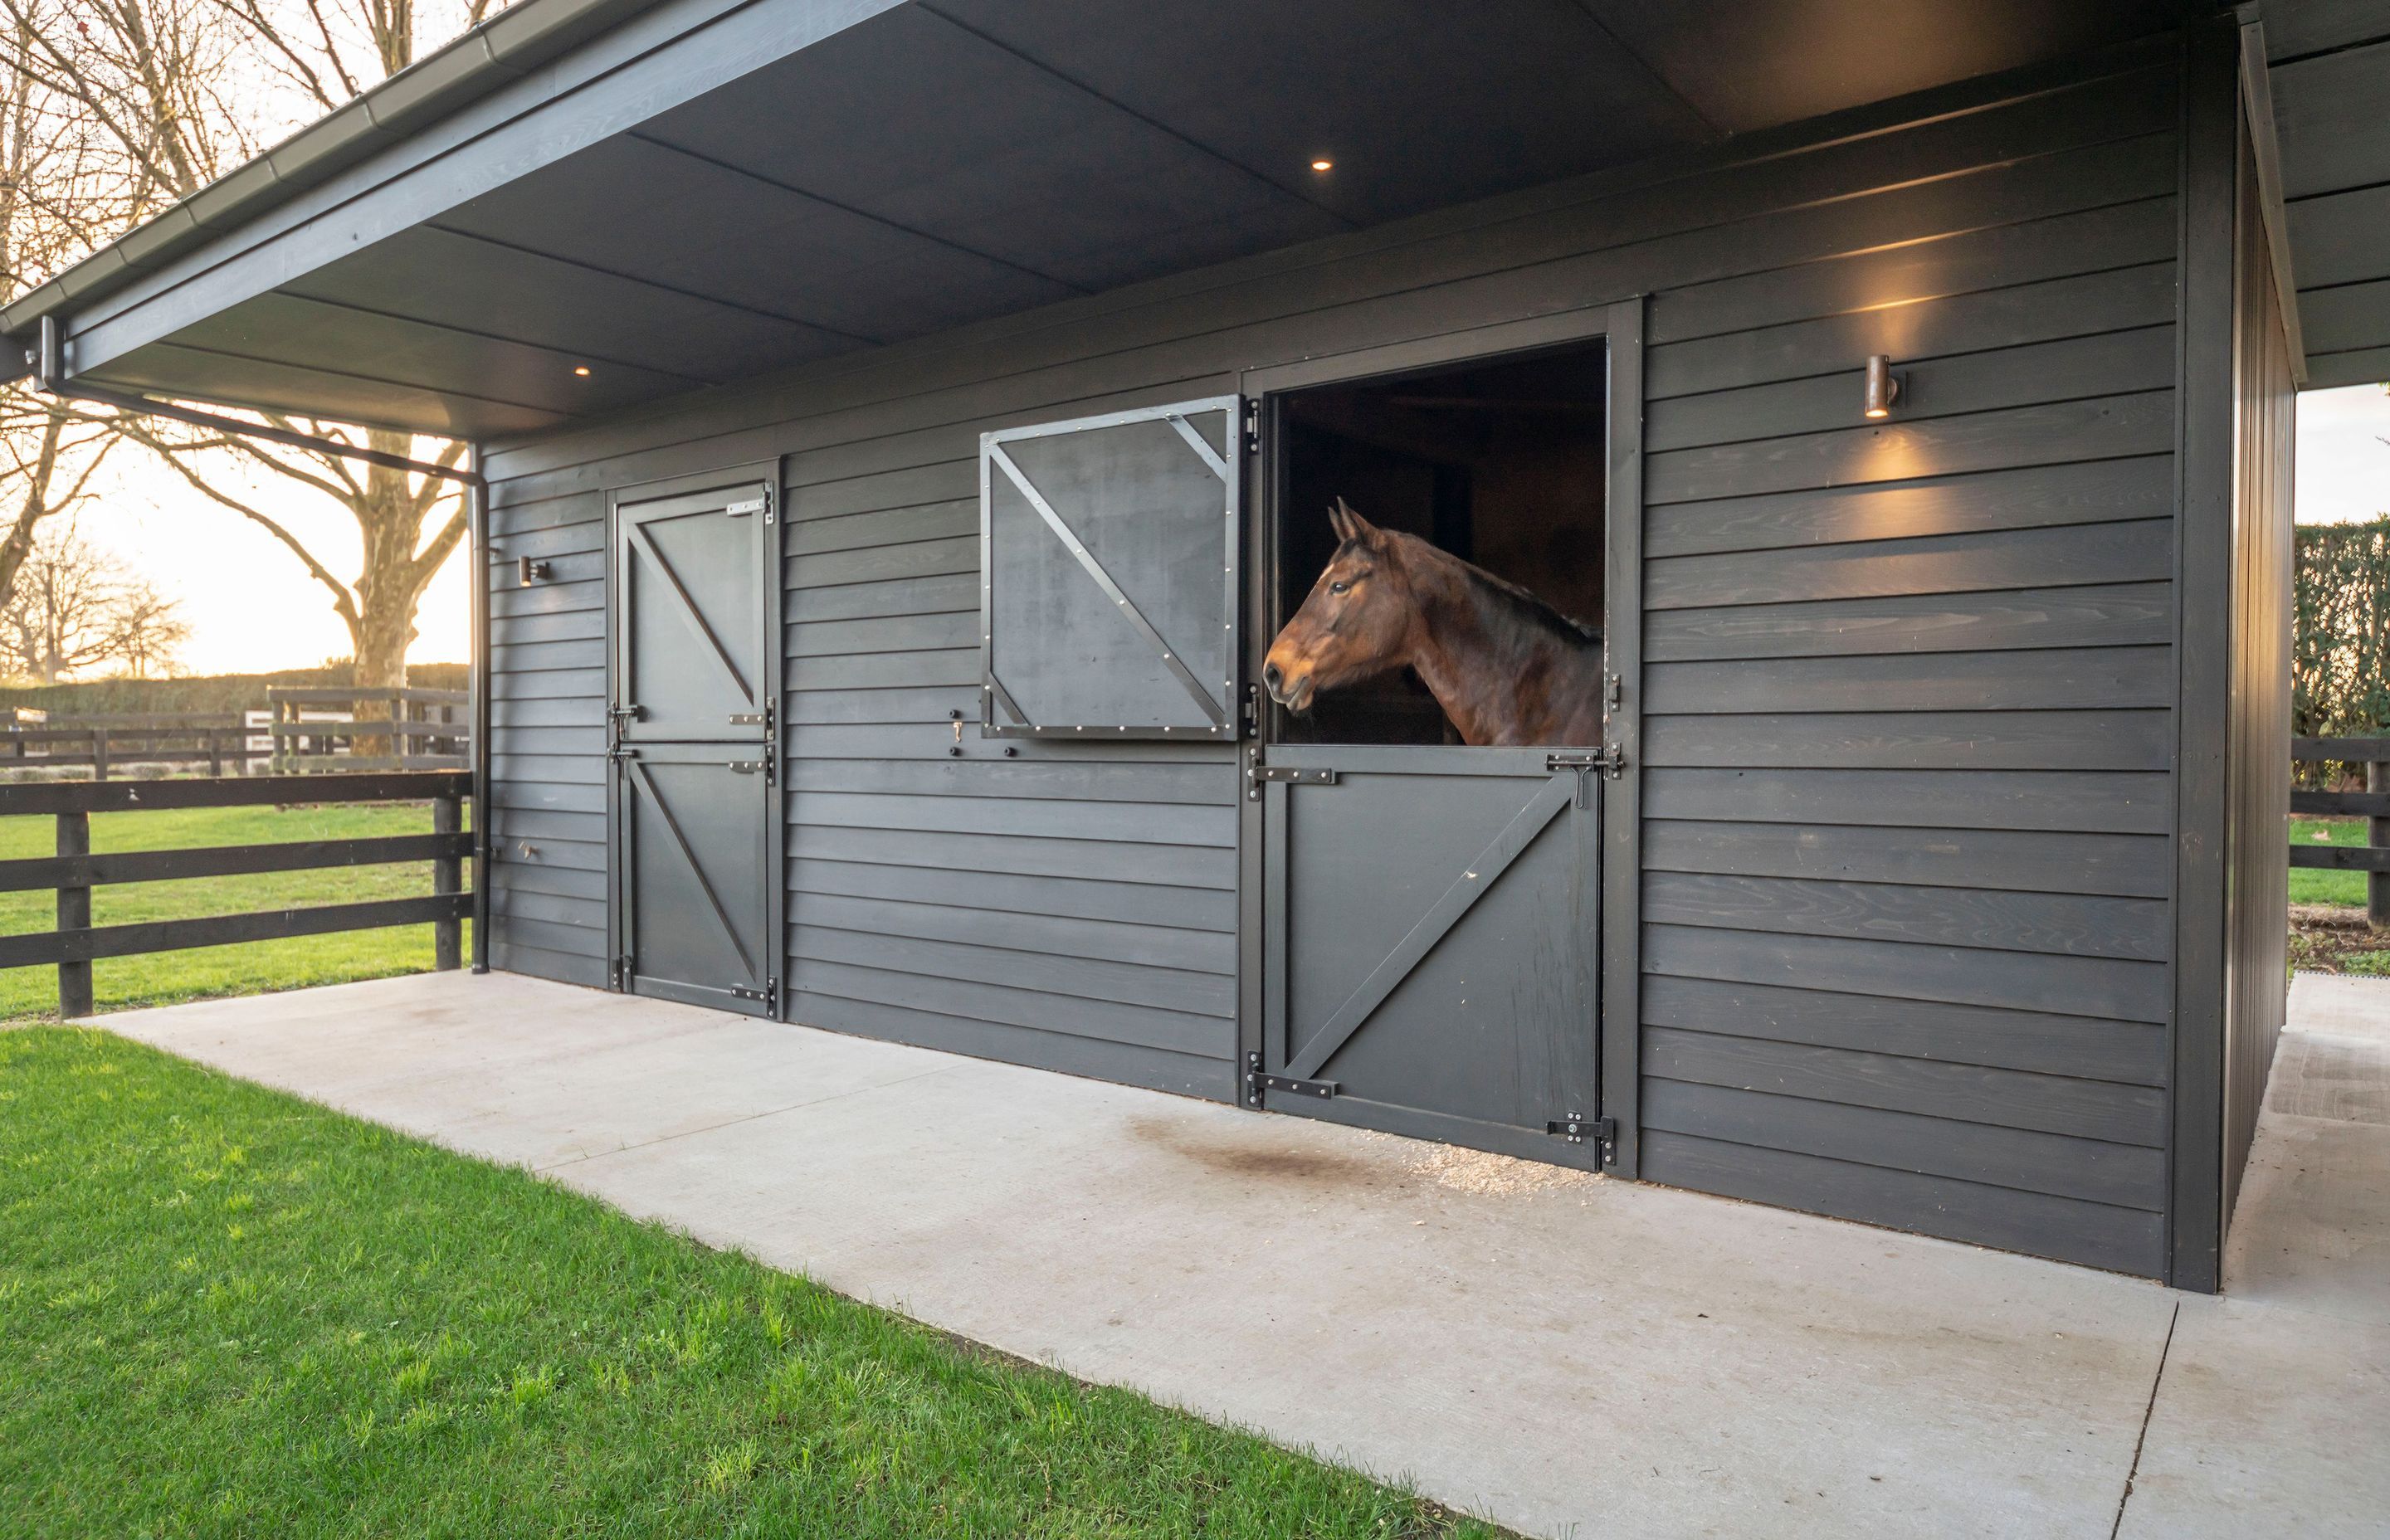 No property in Cambridge would be complete with a horse, with stables at the top of the driveway.